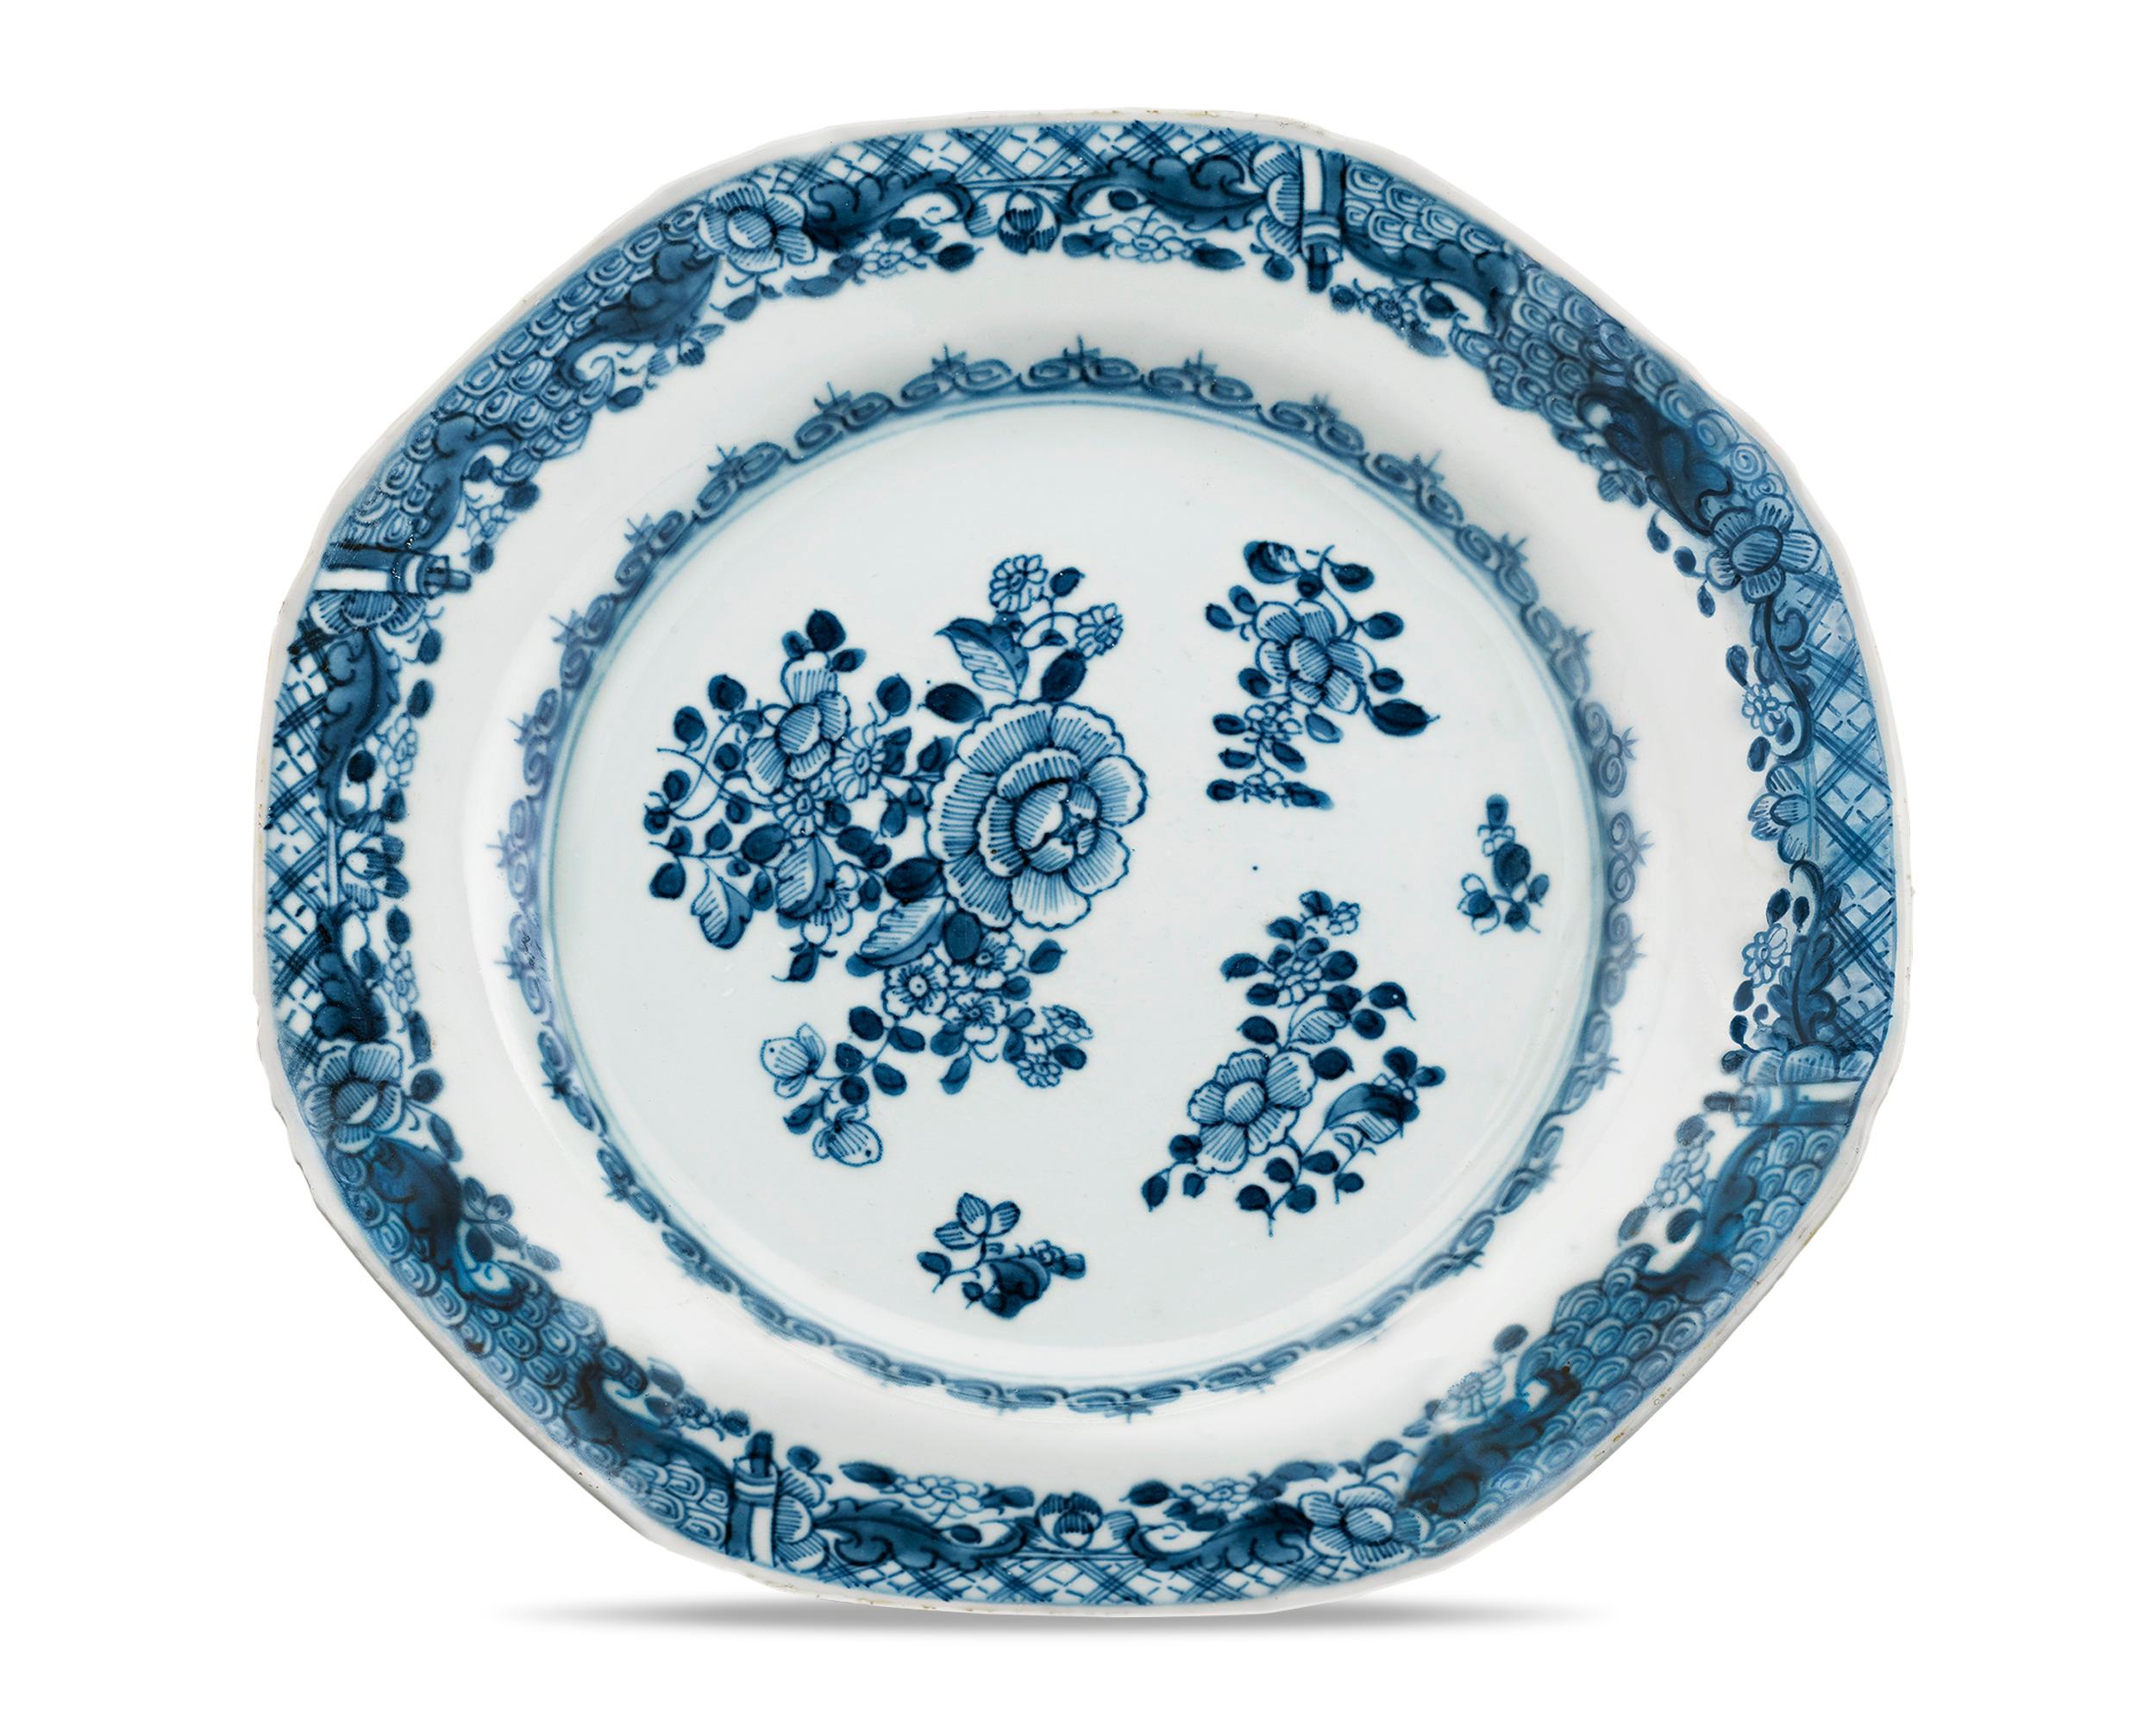 Owned by George and Martha Washington, this important Blue Canton China dinner plate was used by the Presidential couple when entertaining guests at their famed Mount Vernon home. The Washingtons rarely dined out, however they were gracious